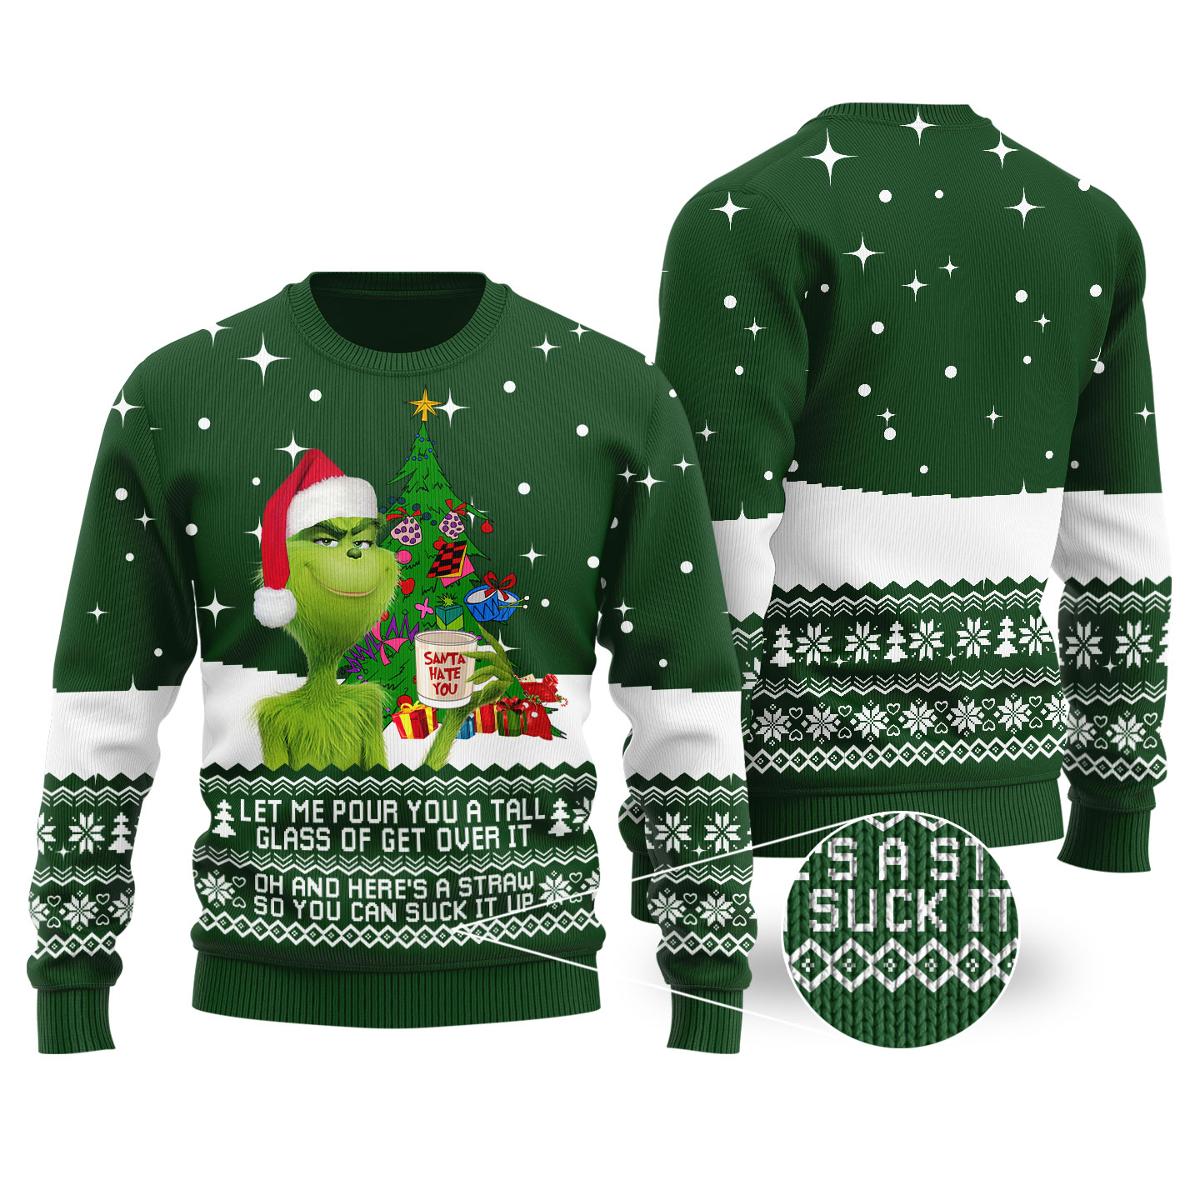 Glass Of Get Over It Grinch Sweater